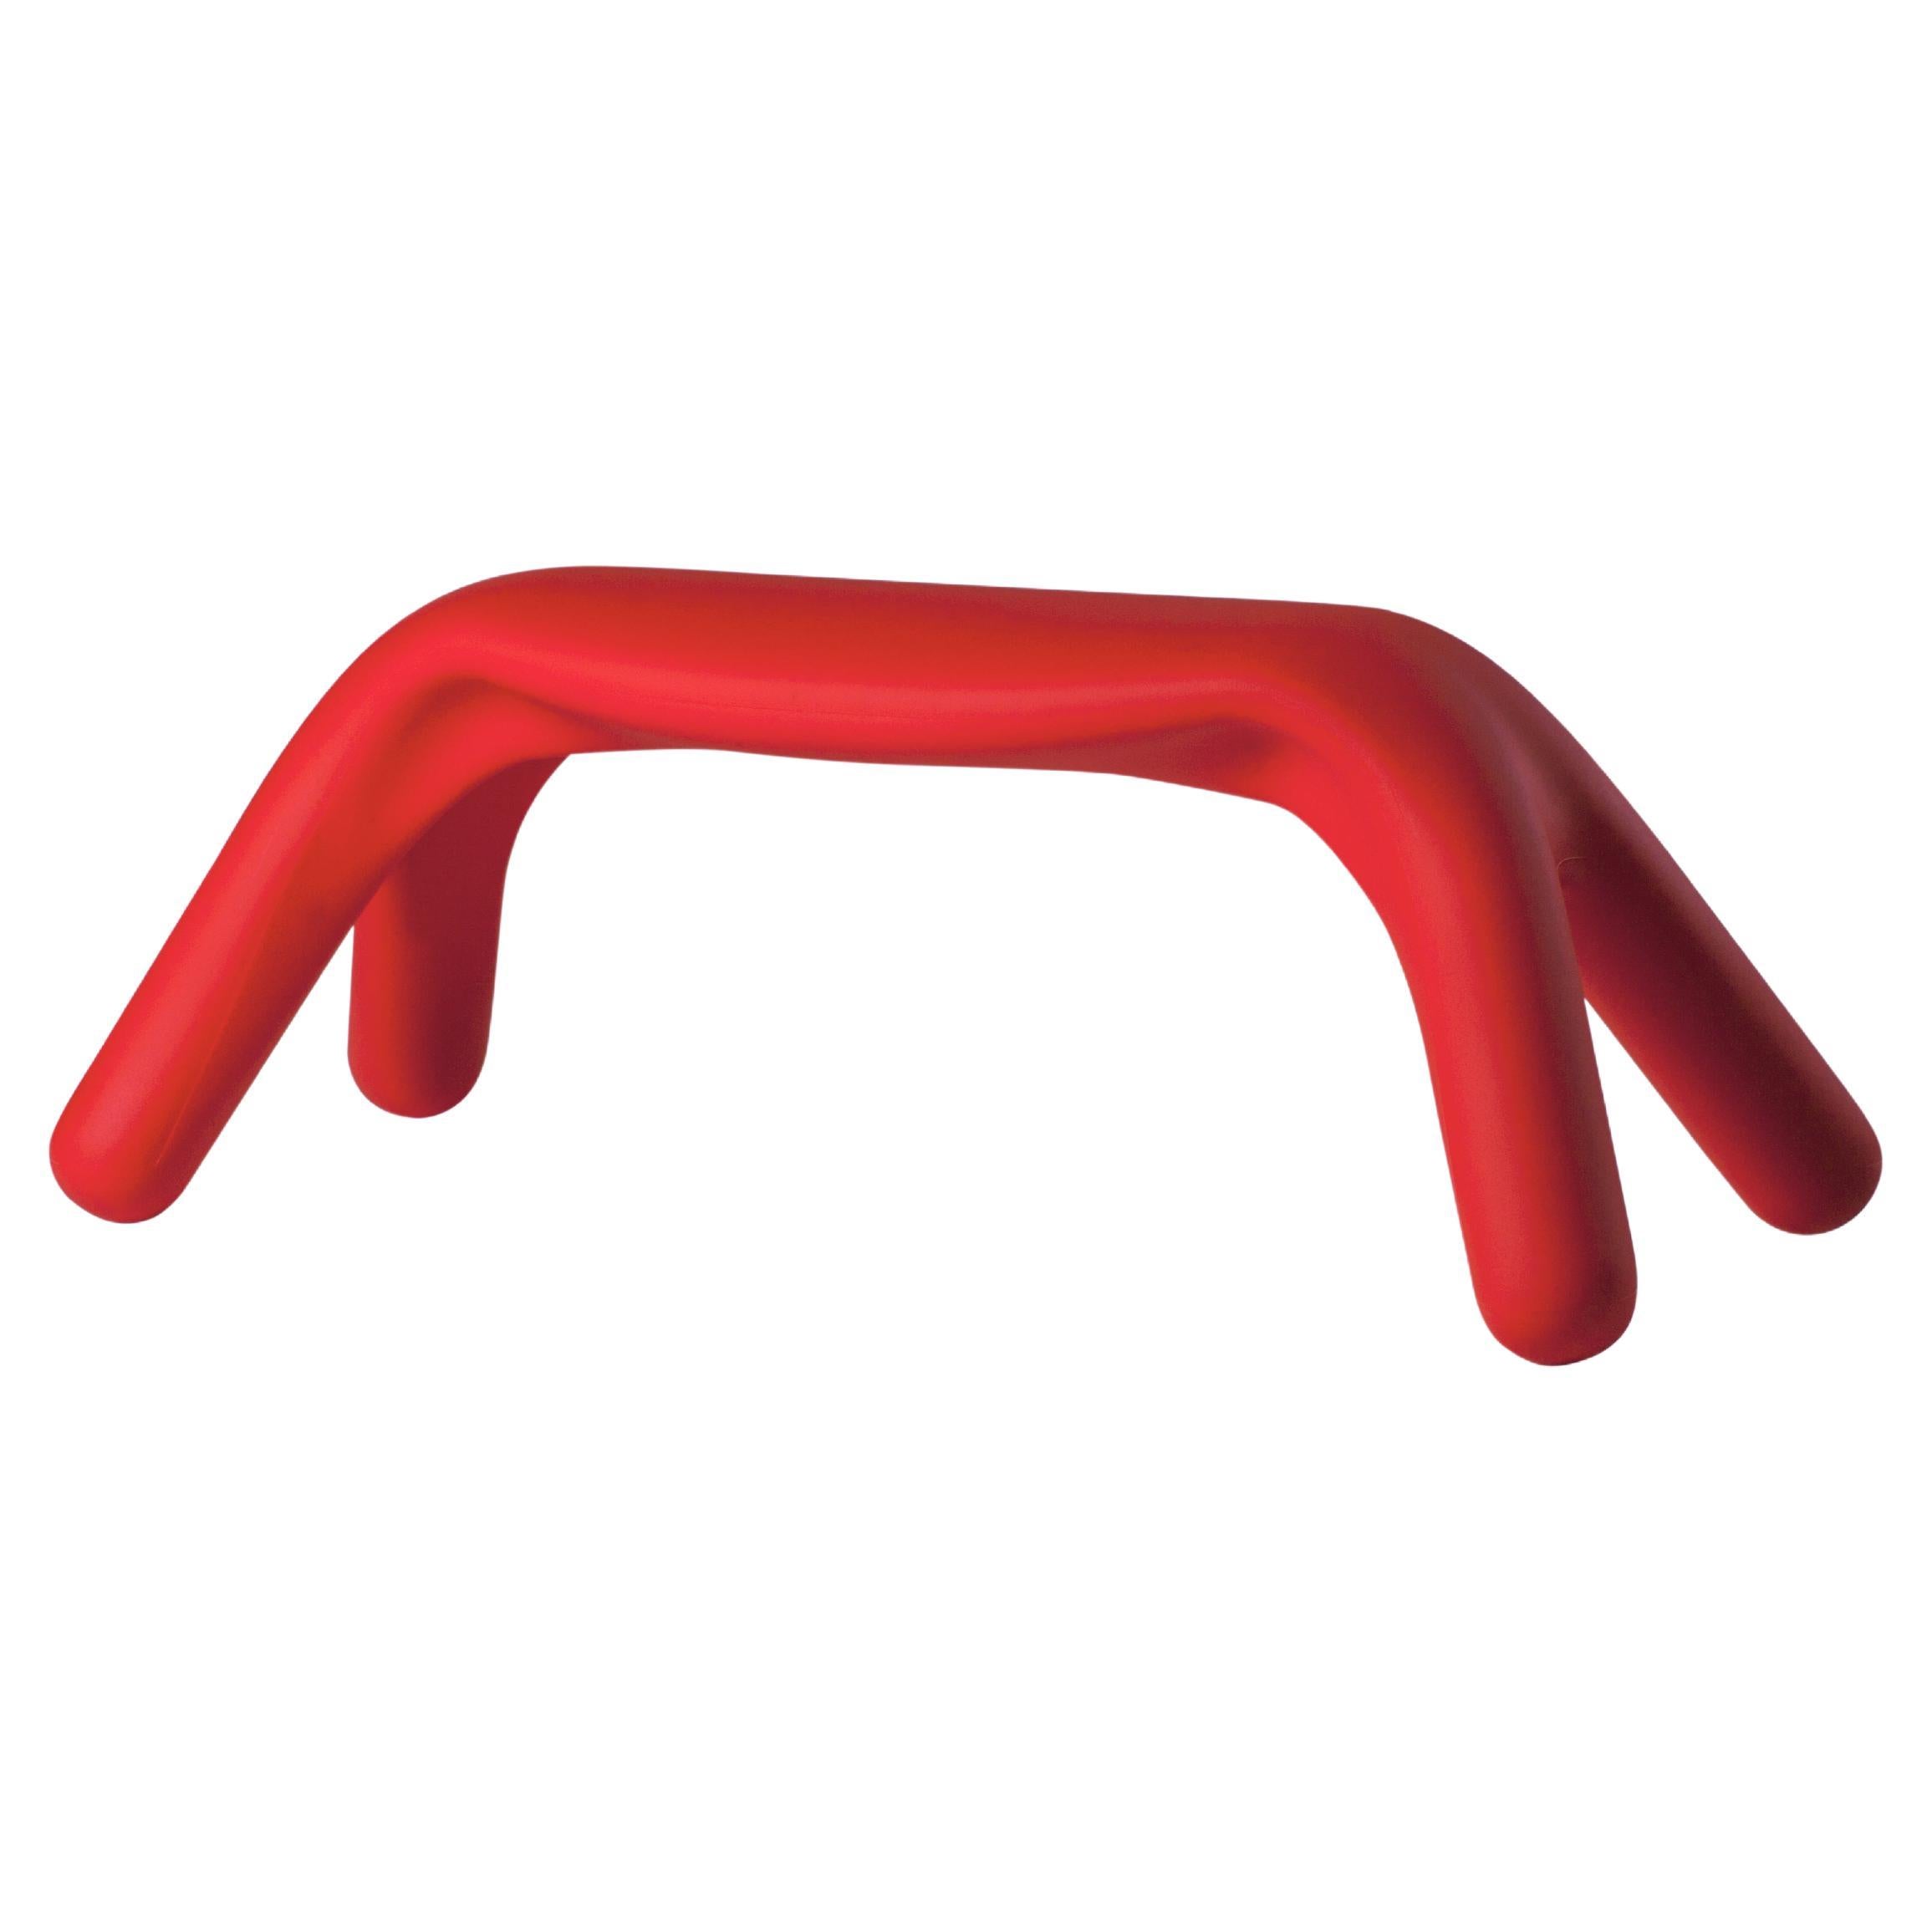 Slide Design Atlas Bench in Flame Red by Giorgio Biscaro For Sale